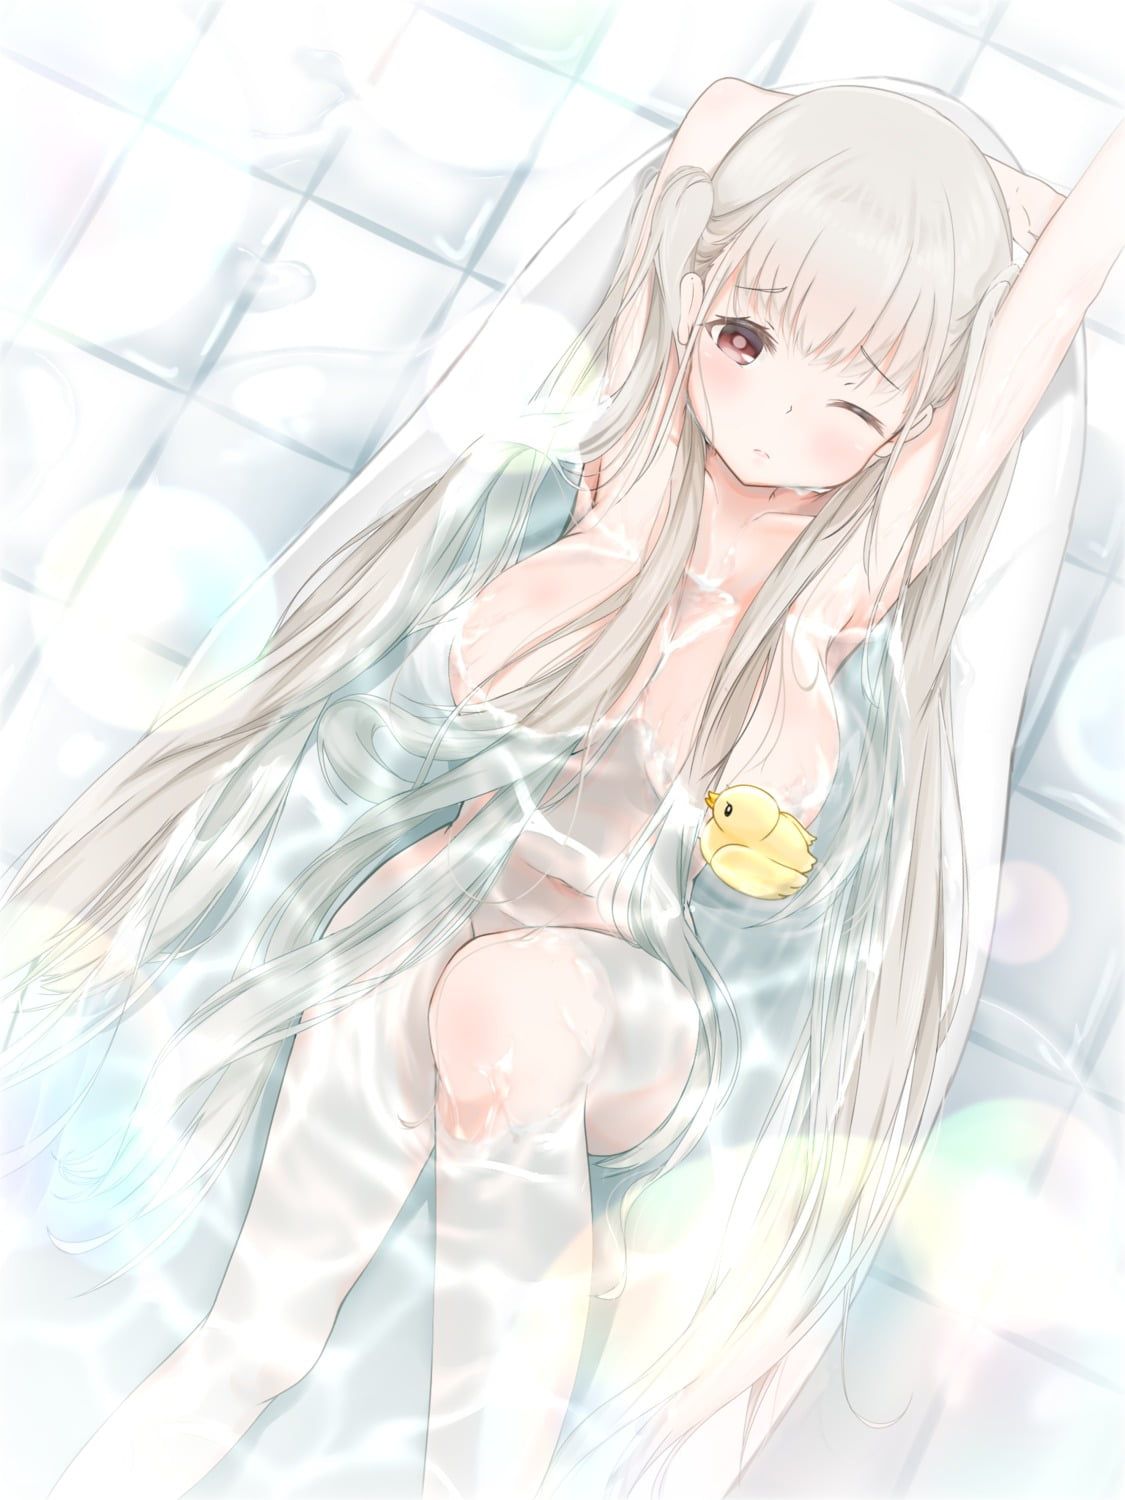 It's a bath, so it's natural to relax naked! It's not ecchi! 19